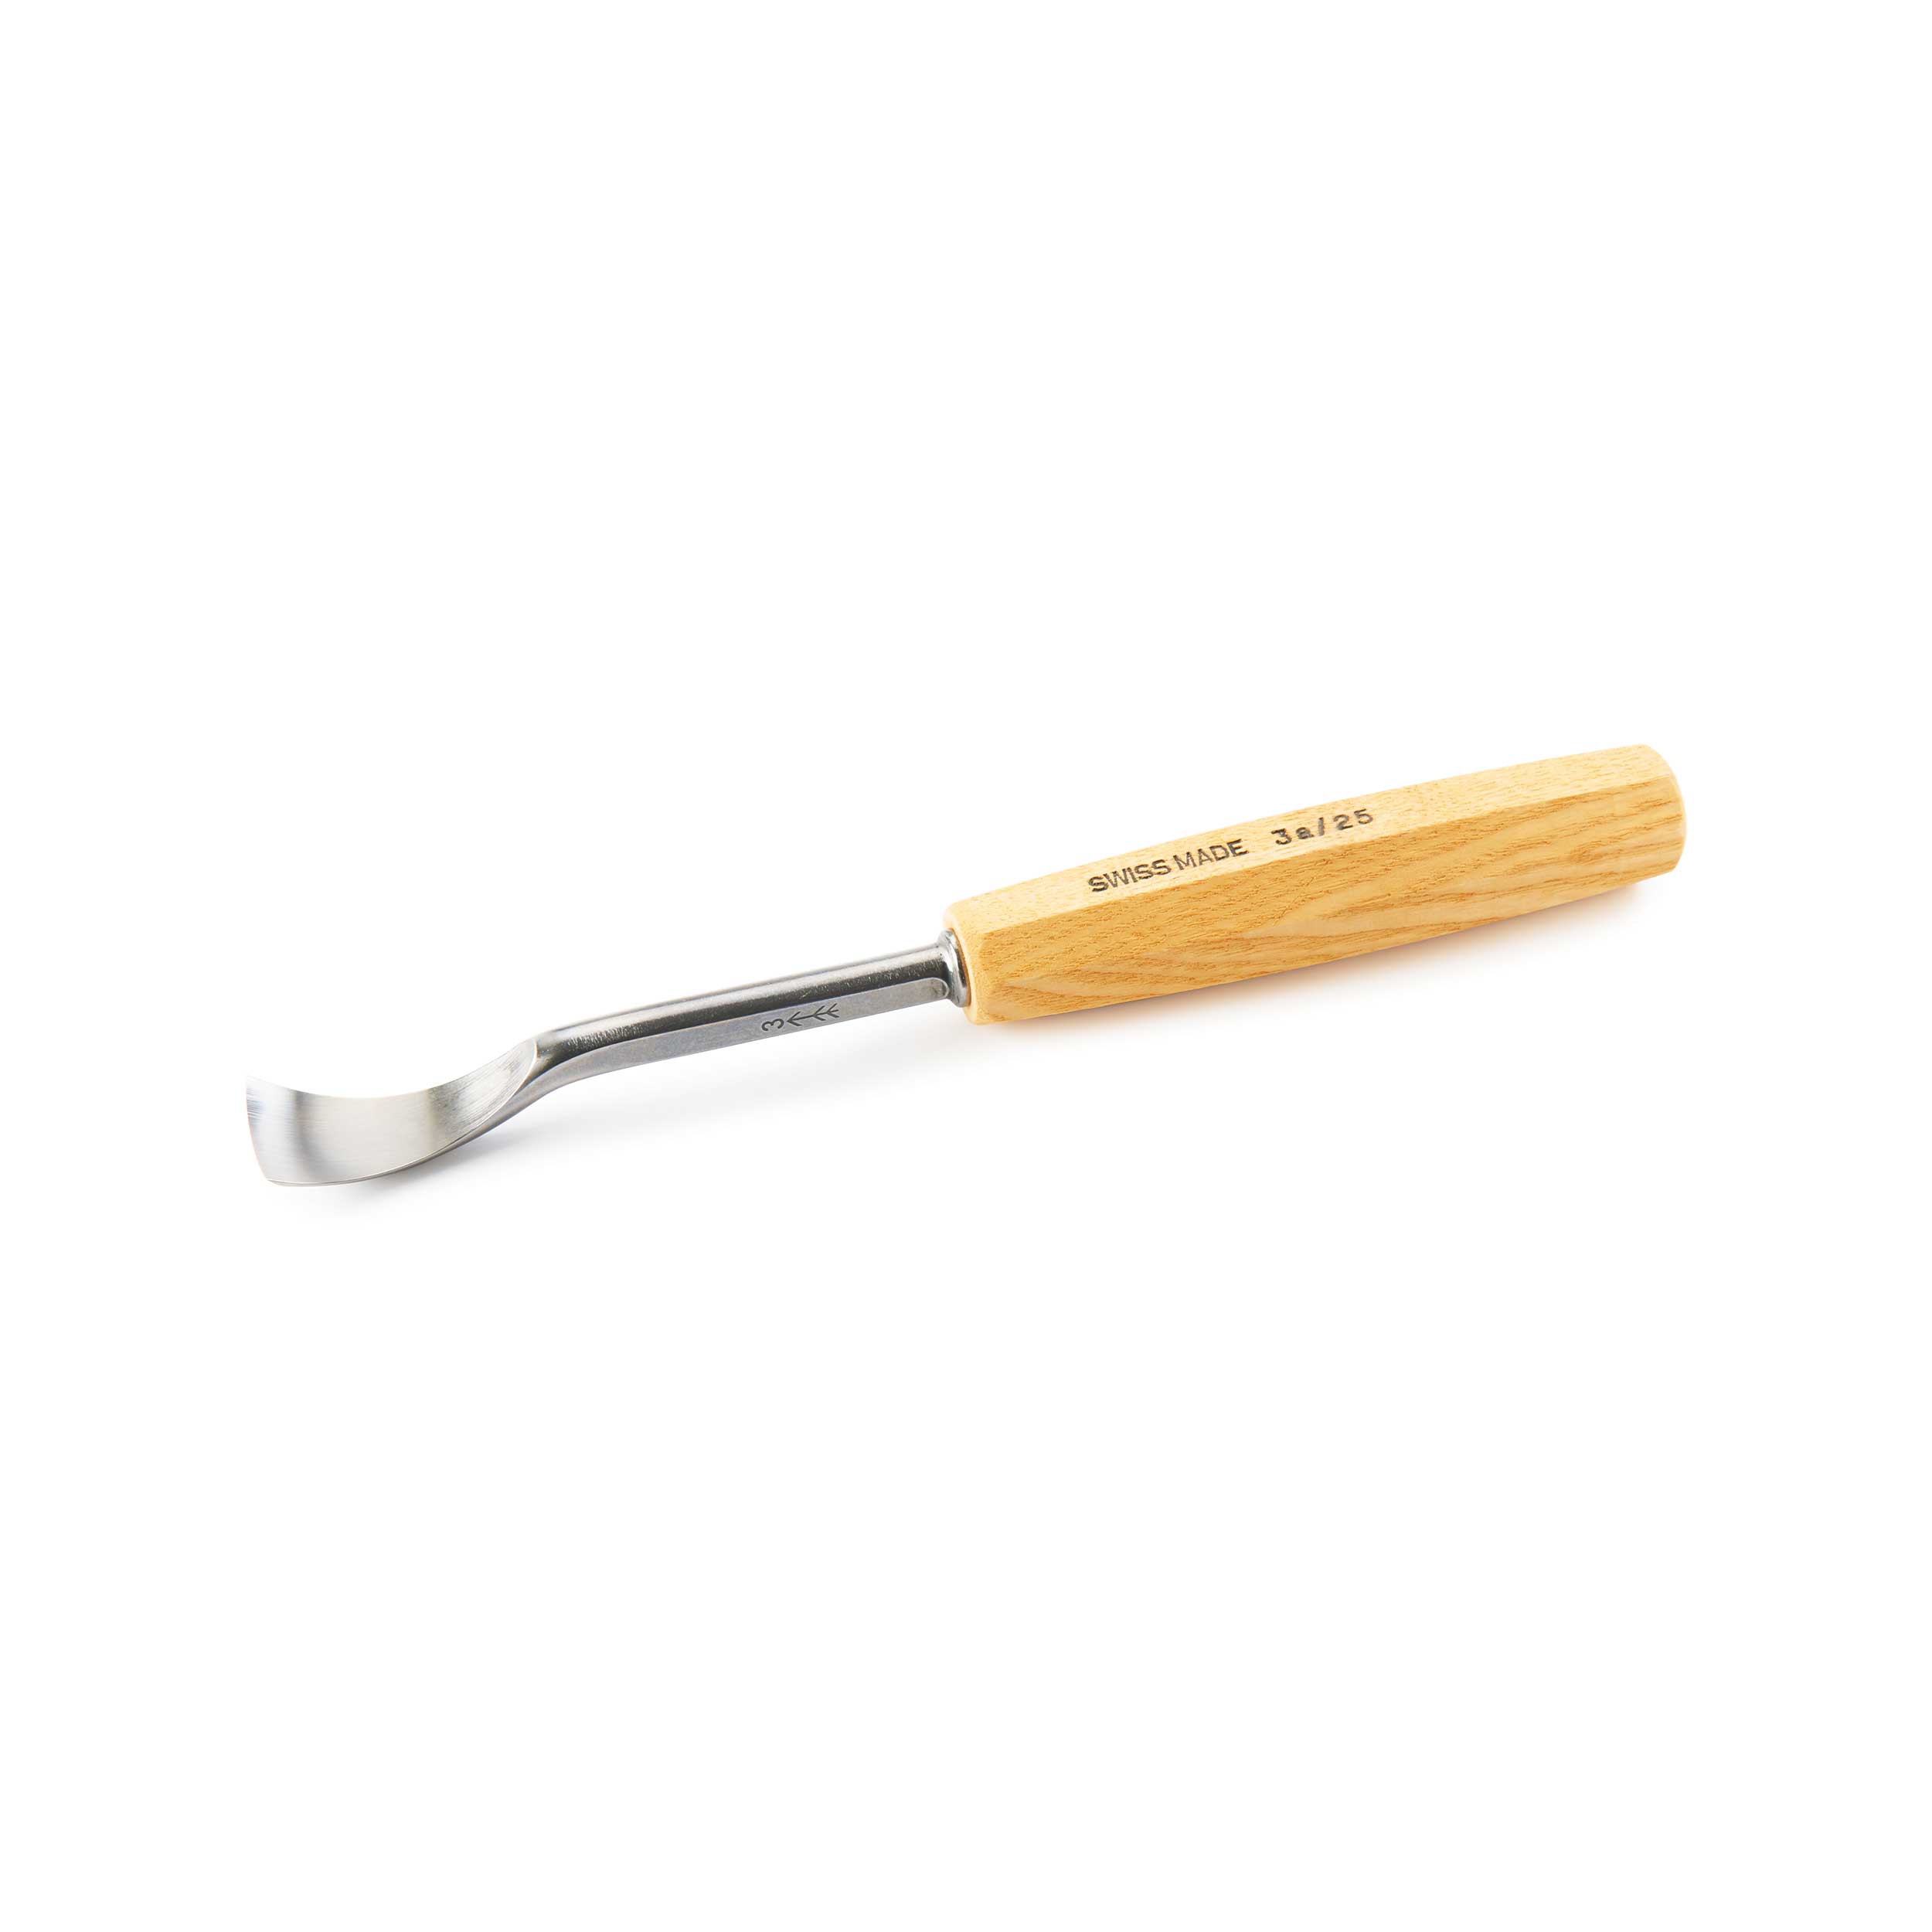 #3 Sweep Spoon Gouge 25 Mm, Full Size